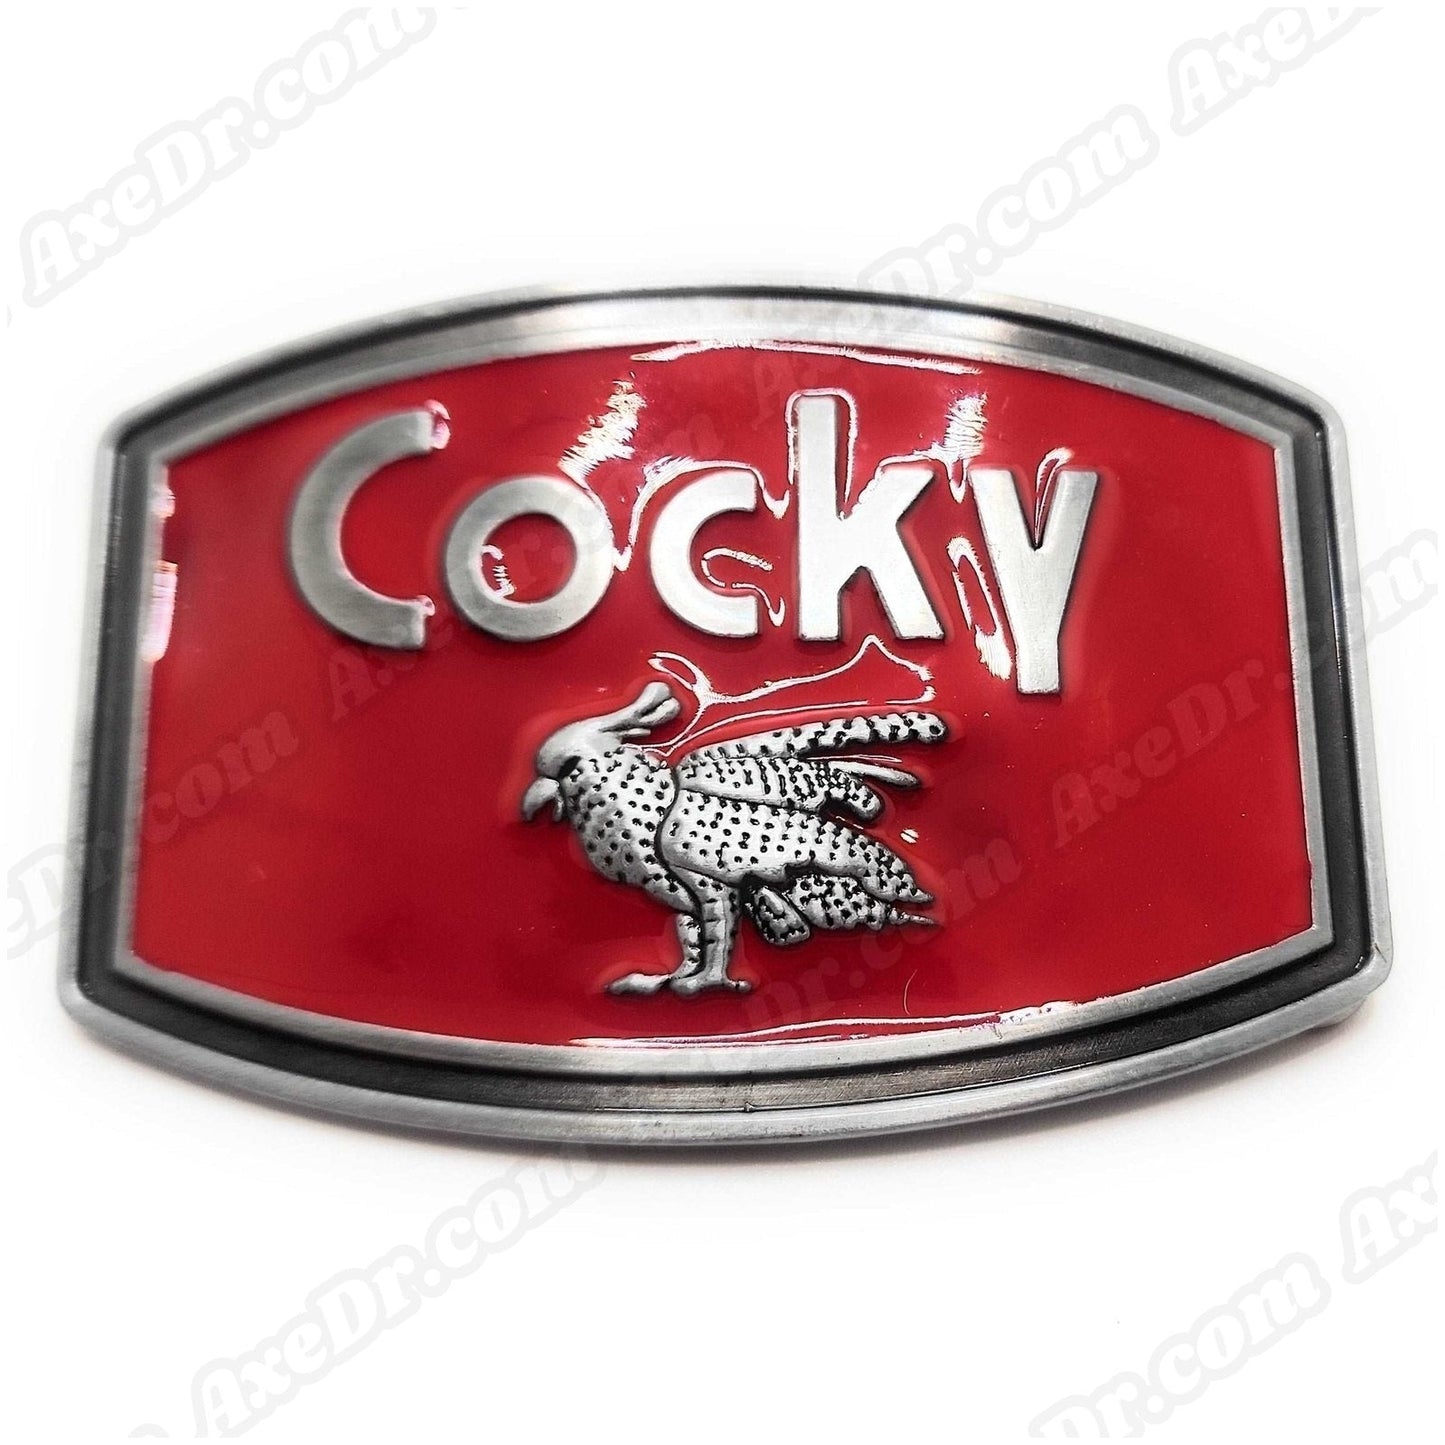 Funny Cocky Rooster Belt Buckle Red Enamel shop.AxeDr.com Beltbuckle, Buckle, Funny Belt Buckle, Lighters